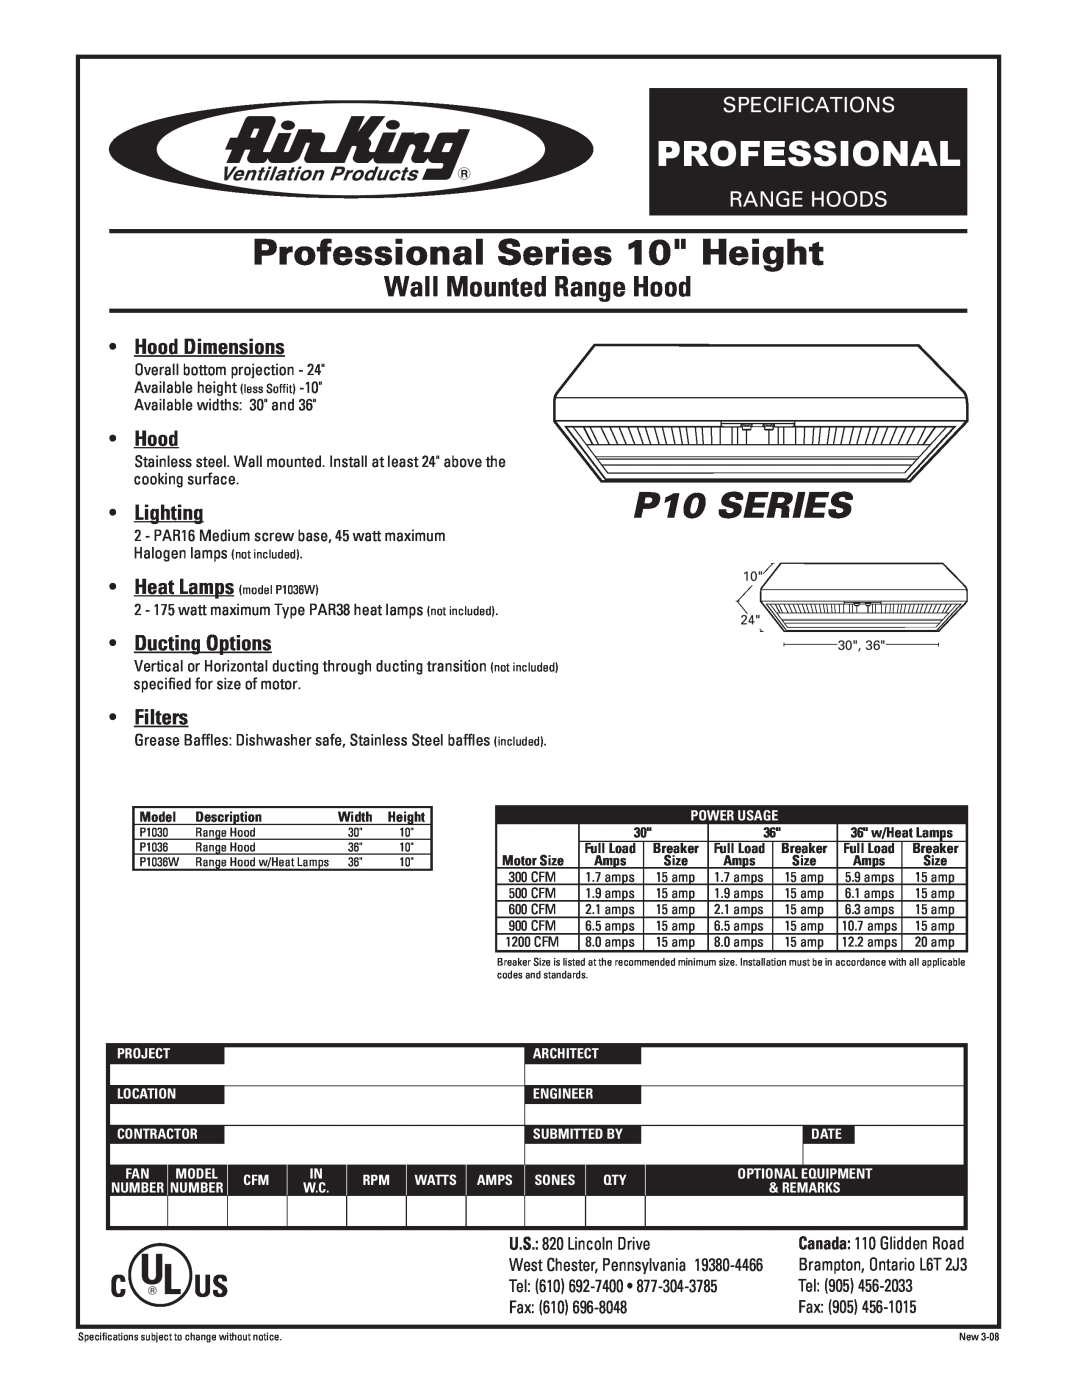 Air King PROFESSIONAL specifications Professional Series 10 Height, P10 SERIES, Wall Mounted Range Hood, Range Hoods 